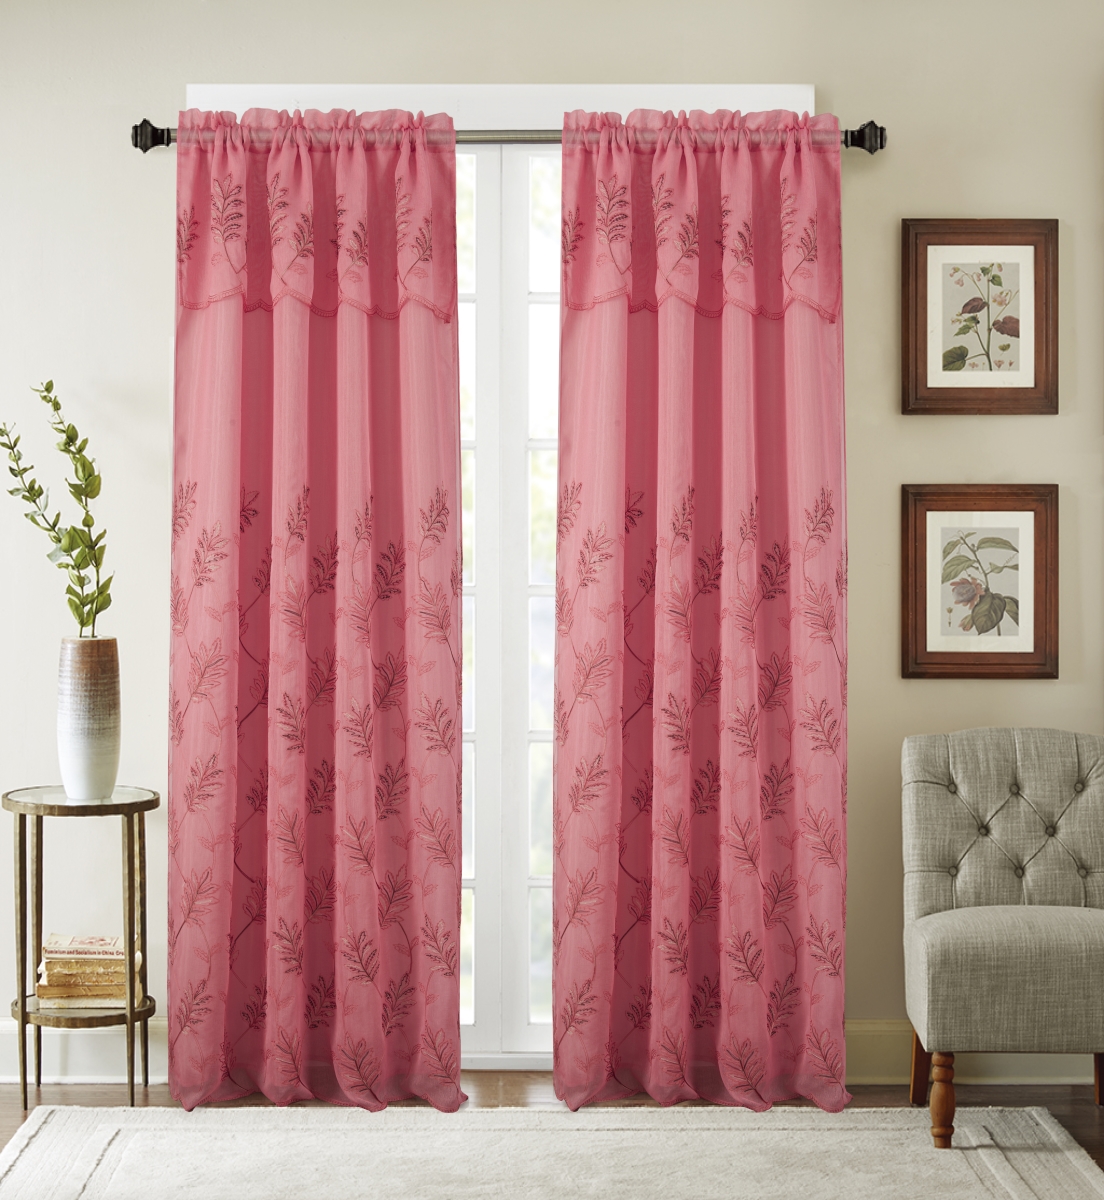 Pnb23724 54 X 90 In. Burton Floral Embroidered Single Rod Pocket Curtain Panel With Attached Valance, Coral